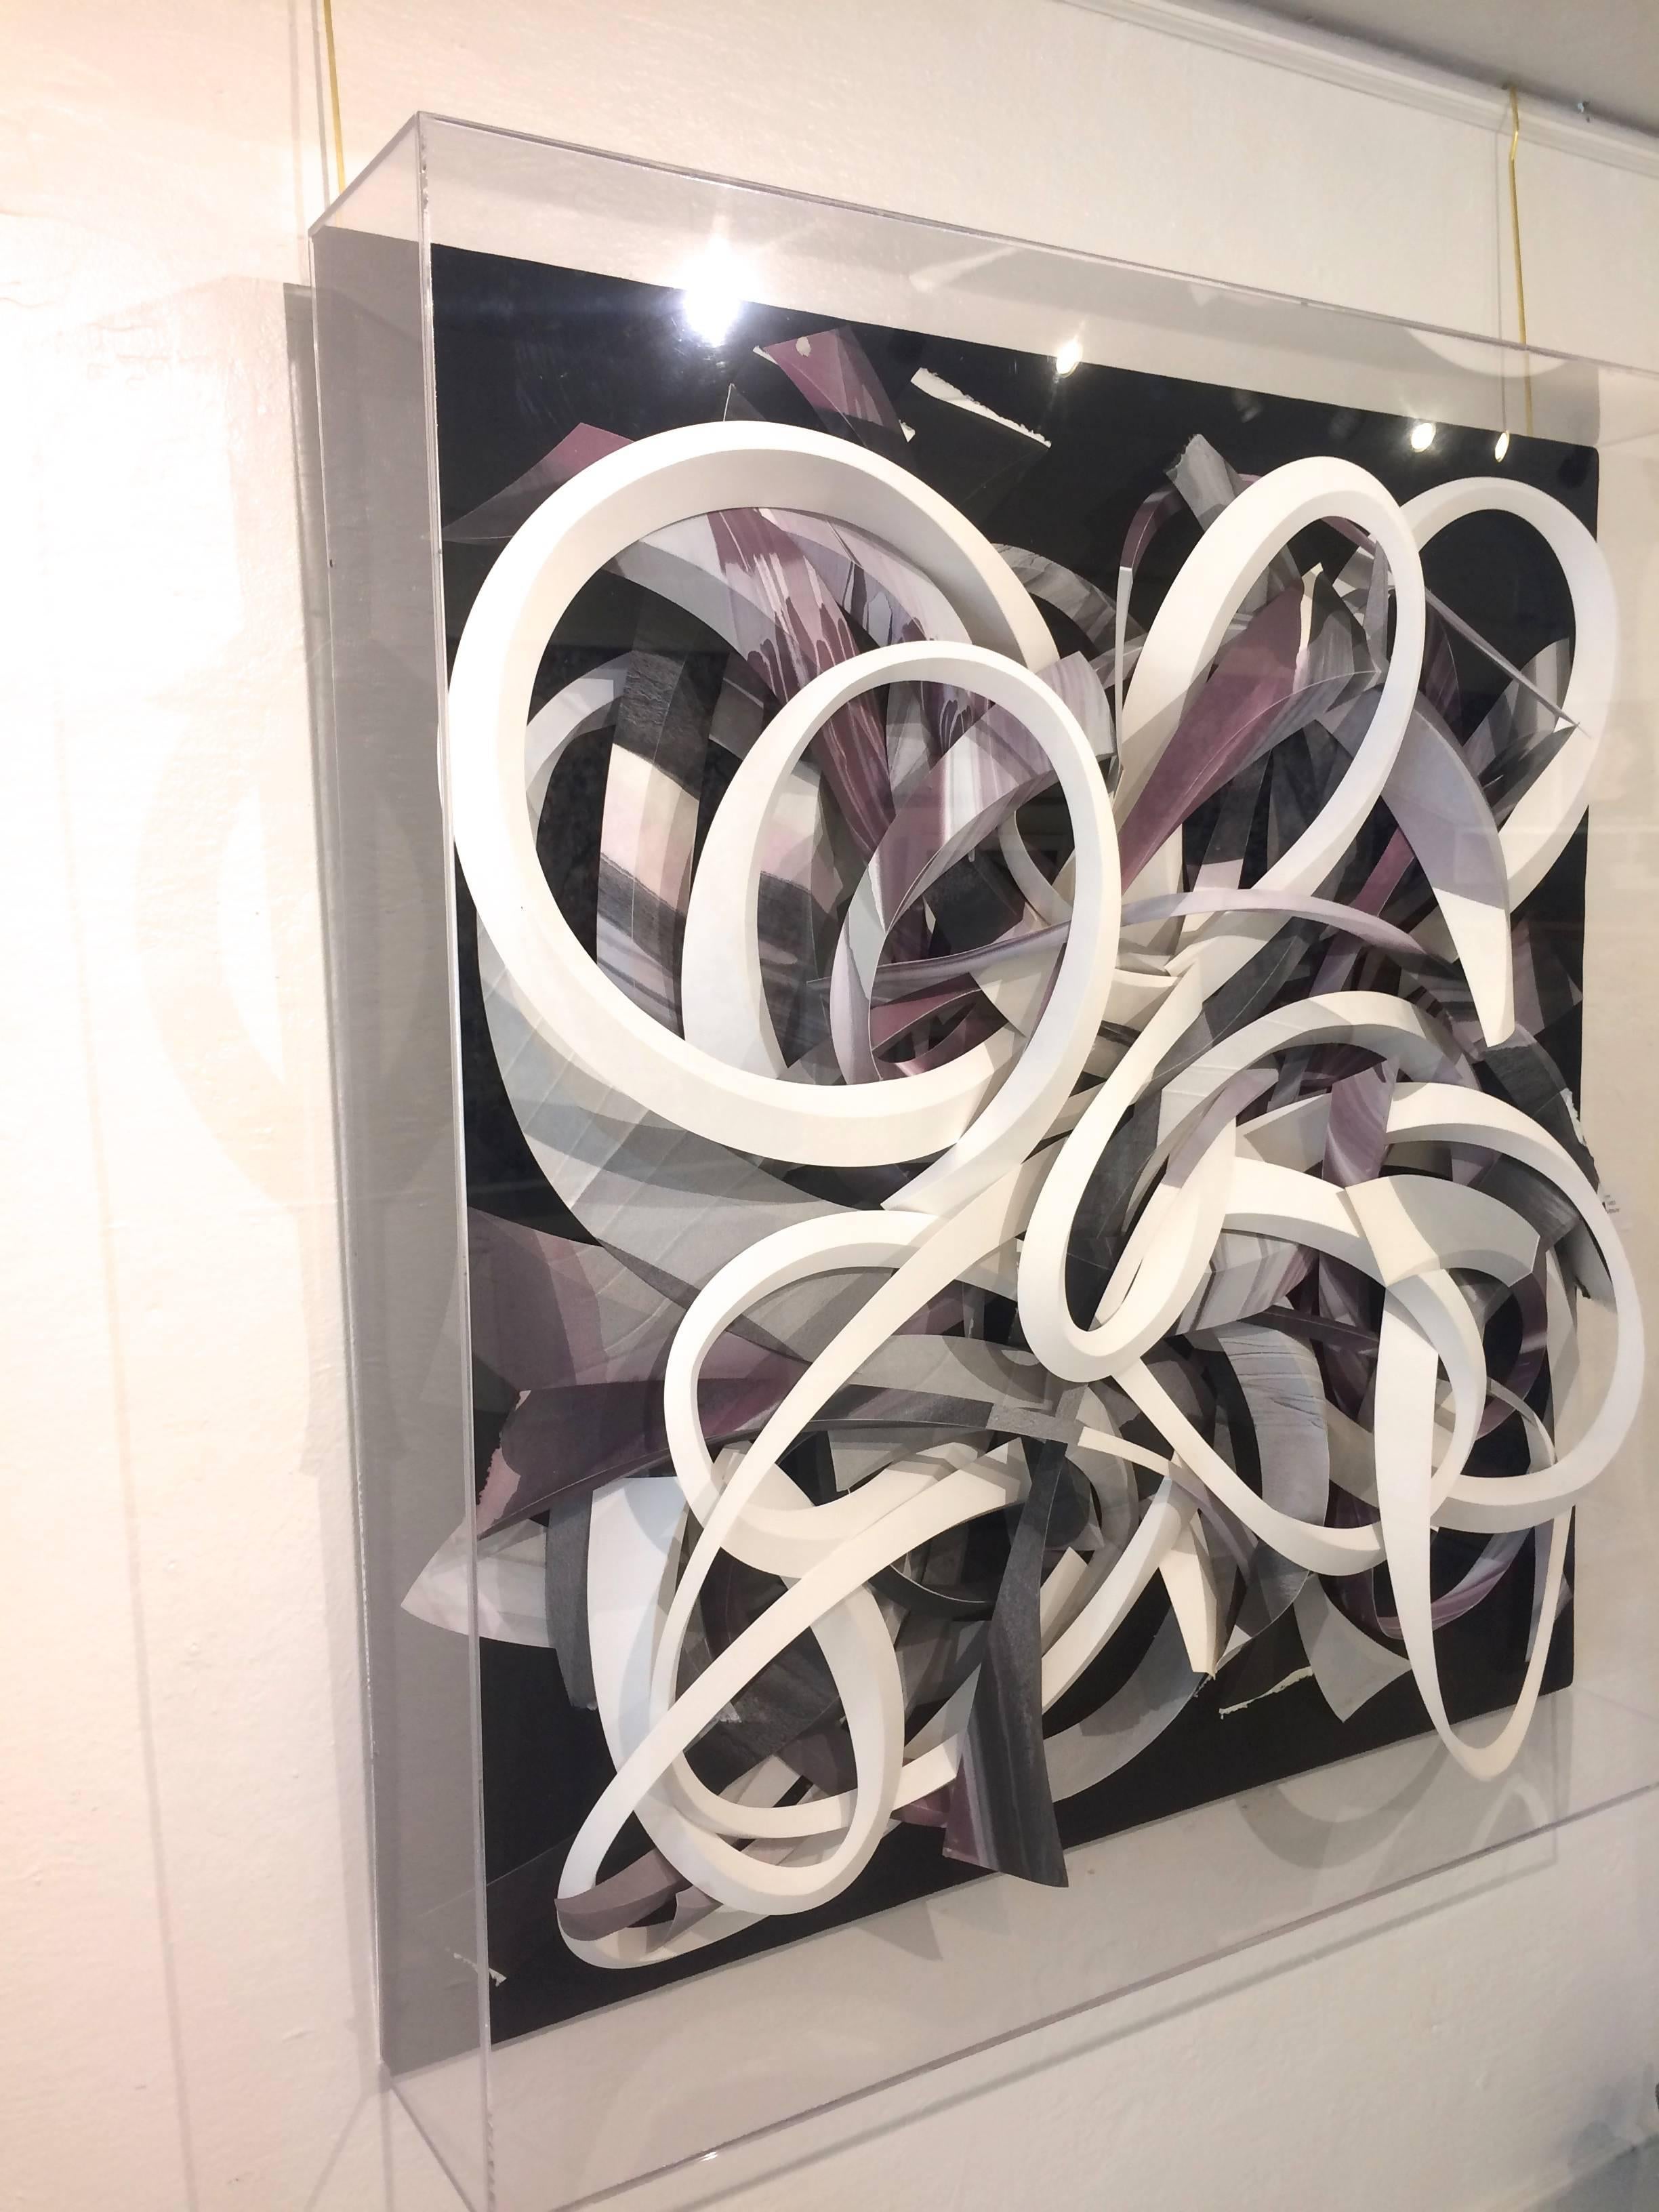 Size: 48x48x8.5 framed Under Plexiglass box

Stunning 3D abstracts, wall sculpture by Pasadena abstract expressionist artist Don Bowman born 1934. Floating waves of paper make a fluid statement on a black background neutral cream palette with pops